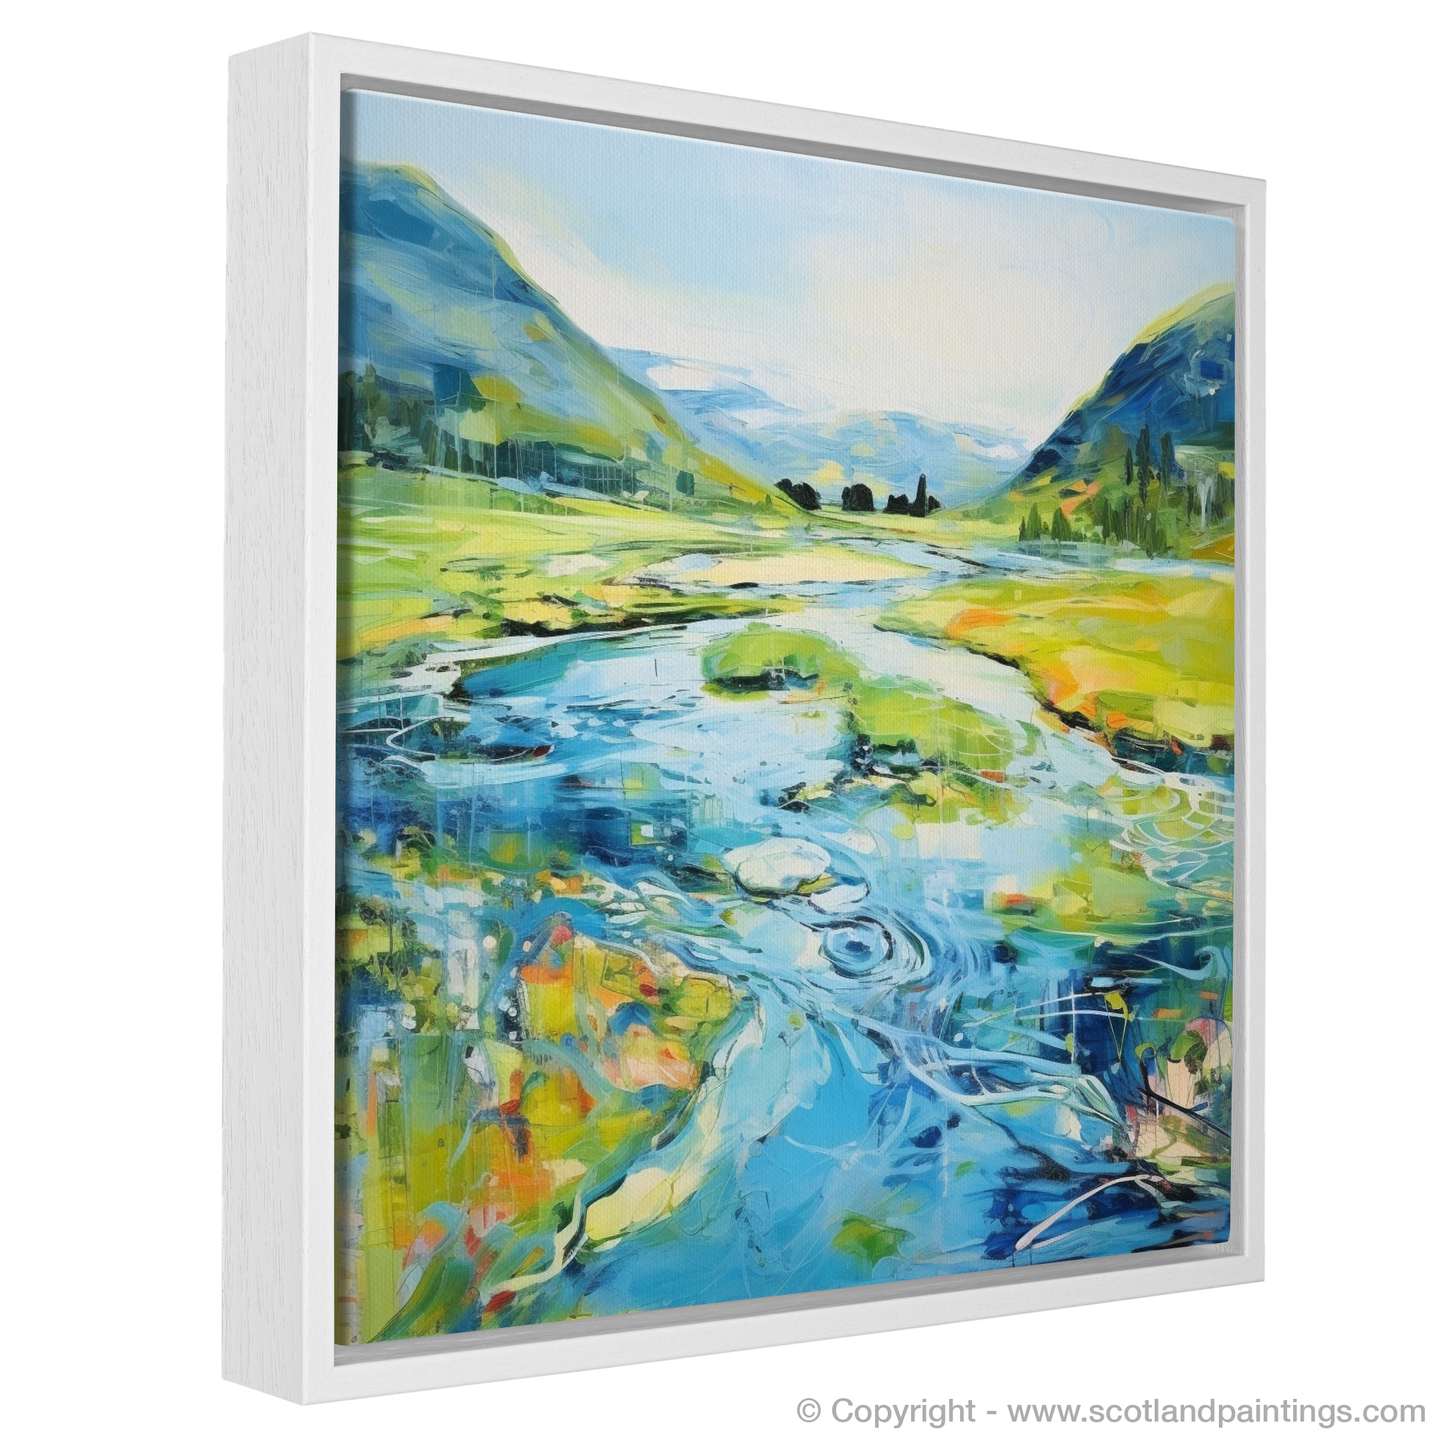 Painting and Art Print of River Orchy, Argyll and Bute in summer entitled "Summer Serenade on the River Orchy".